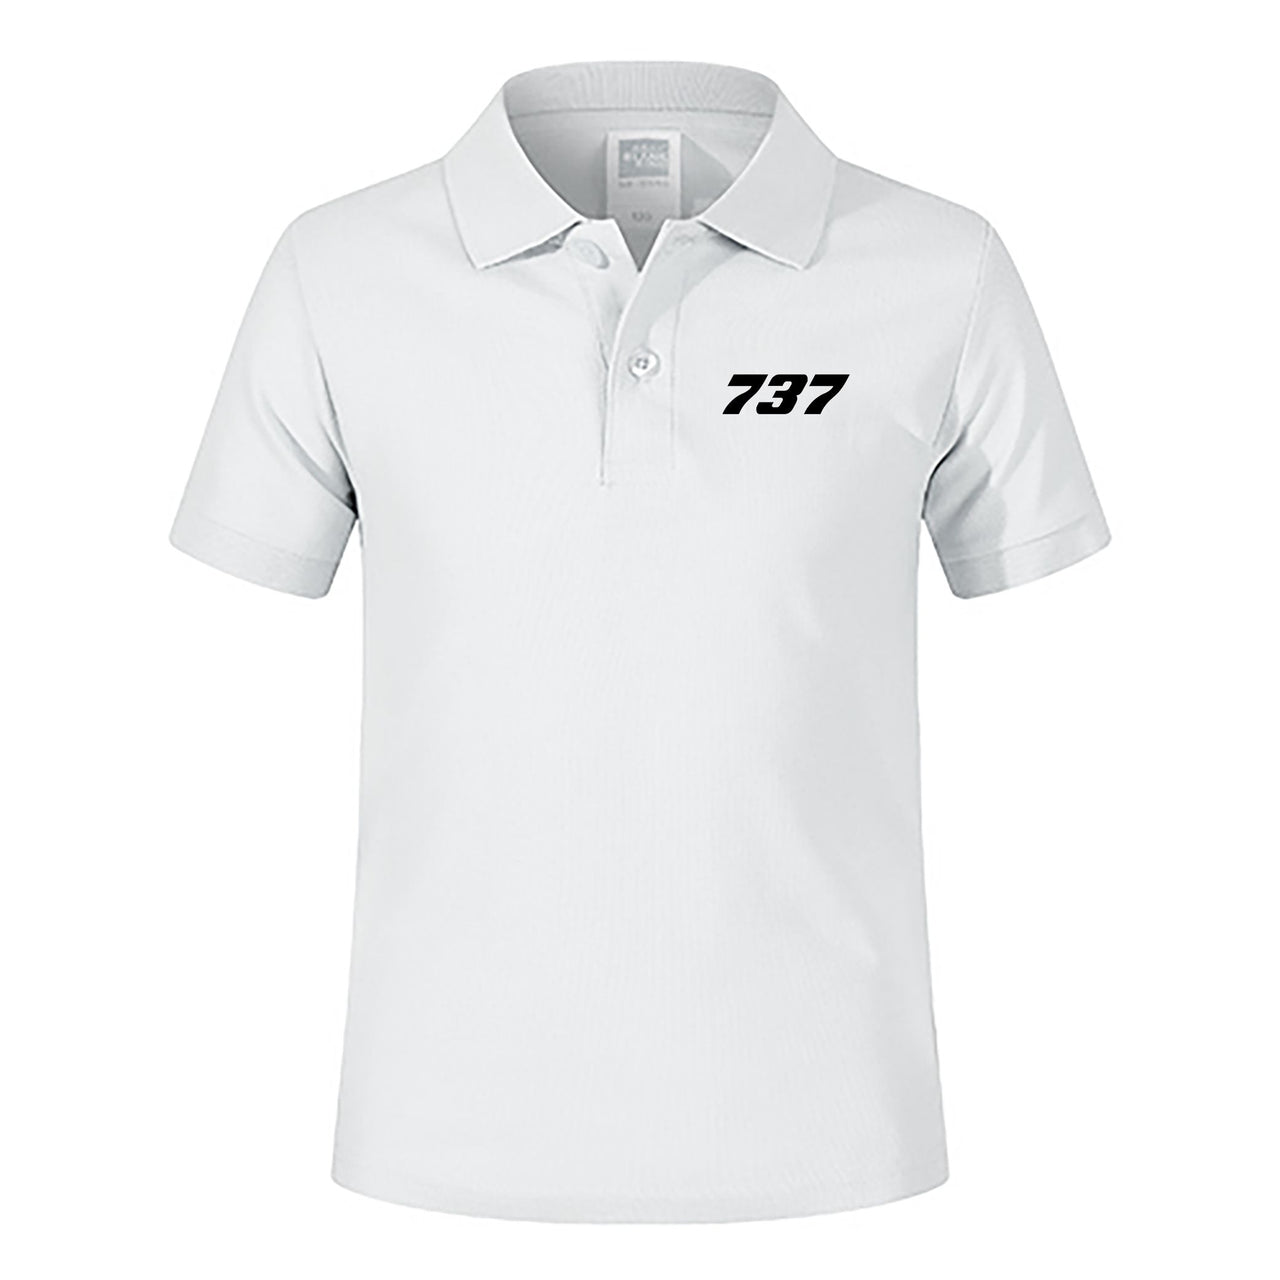 737 Flat Text Designed Children Polo T-Shirts